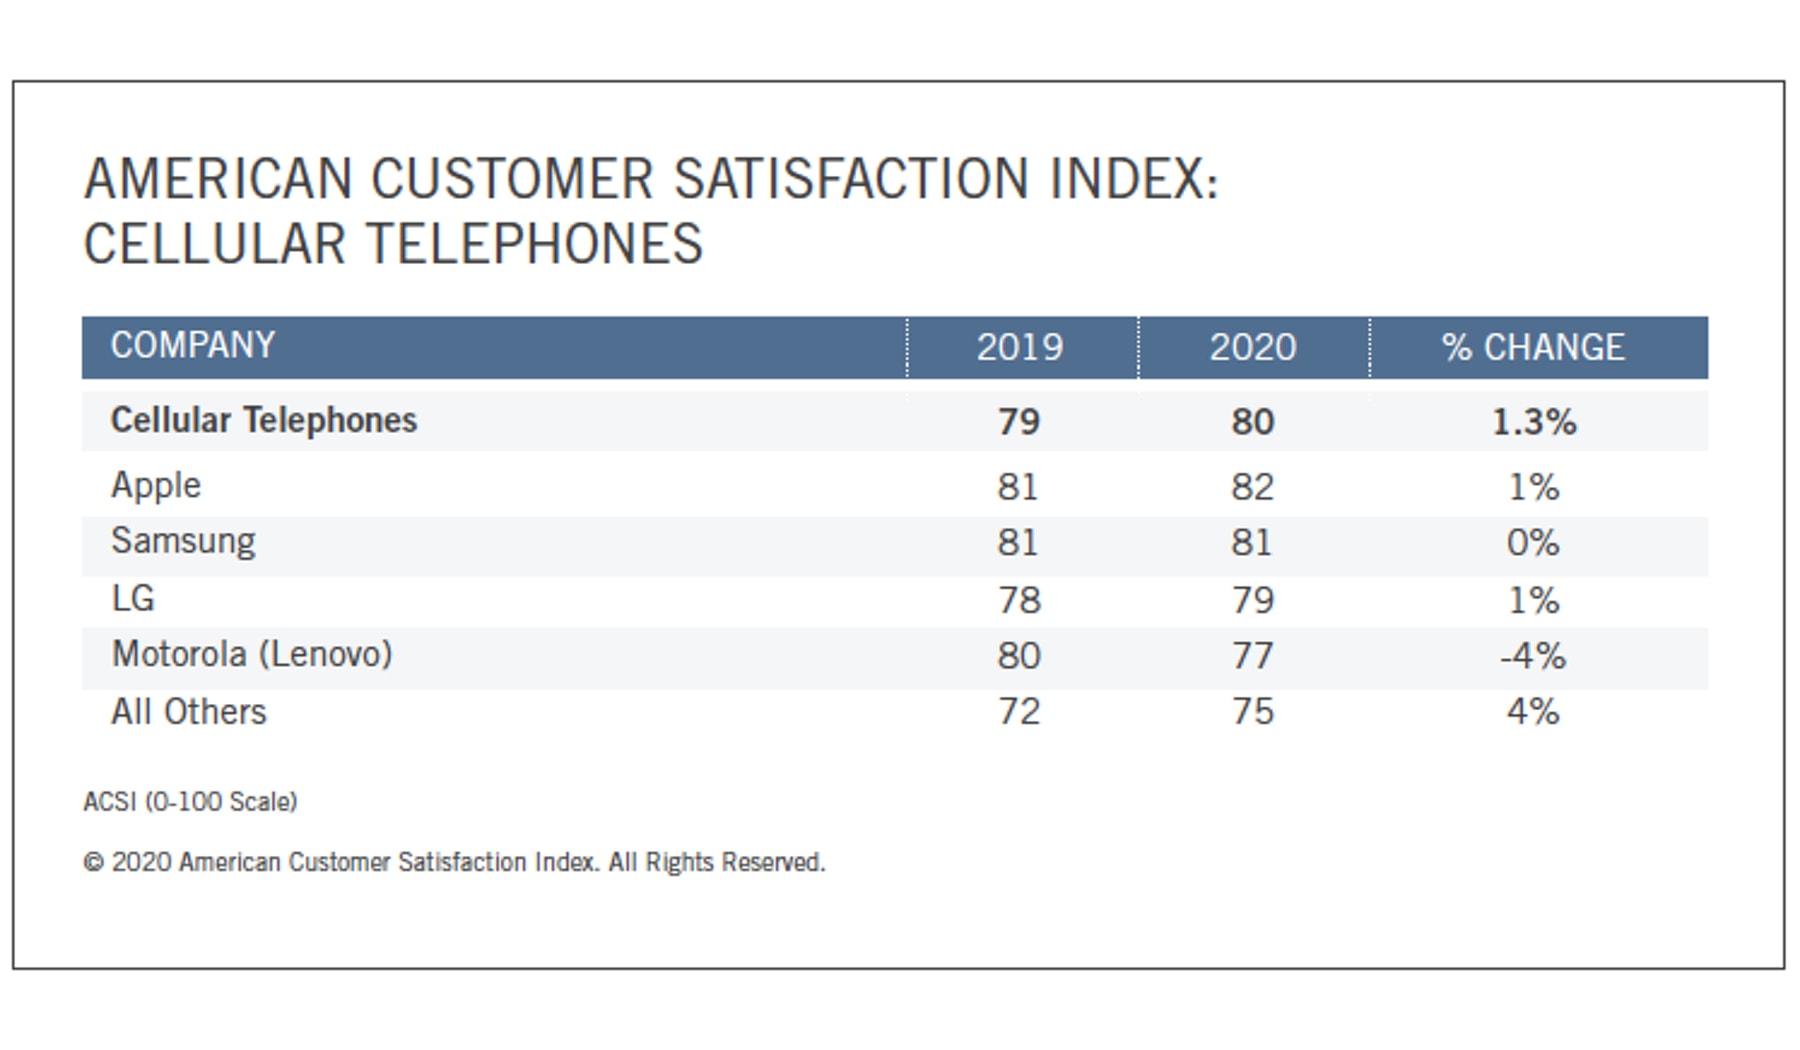 iPhones edge out Samsung mobile phones among customer satisfaction